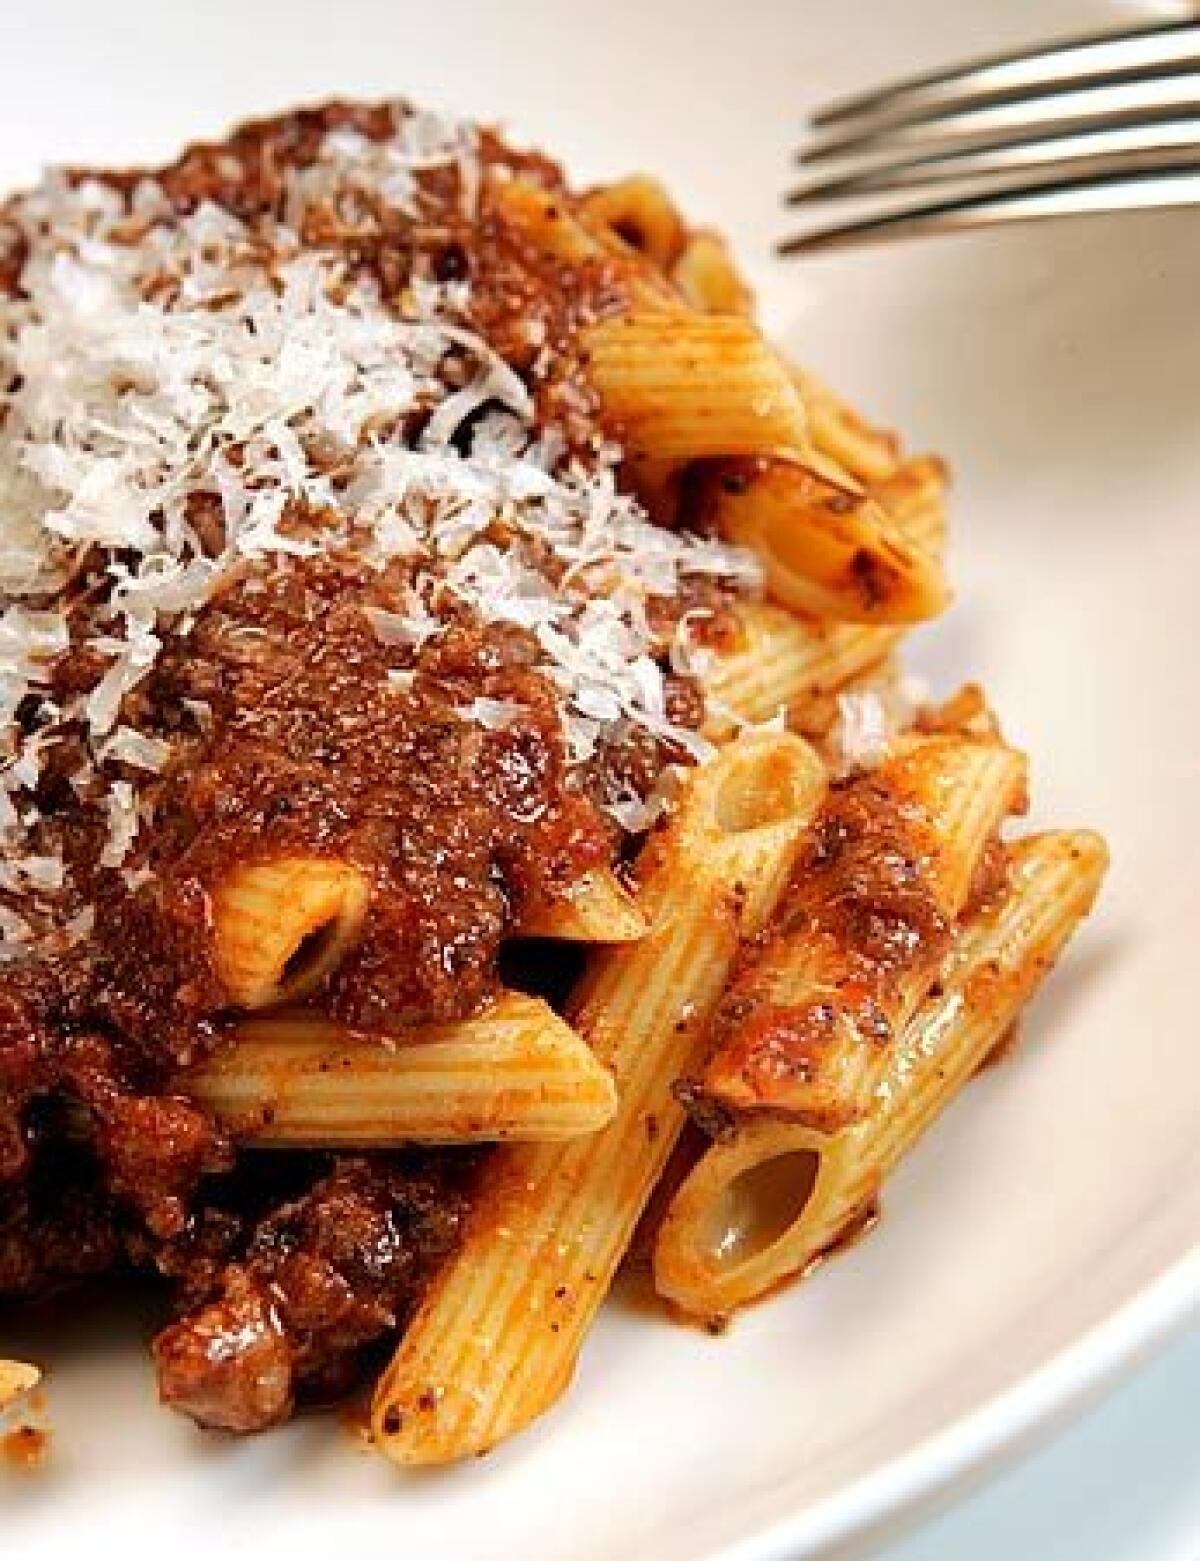 Four kinds of pork add rich flavor to this ragu.